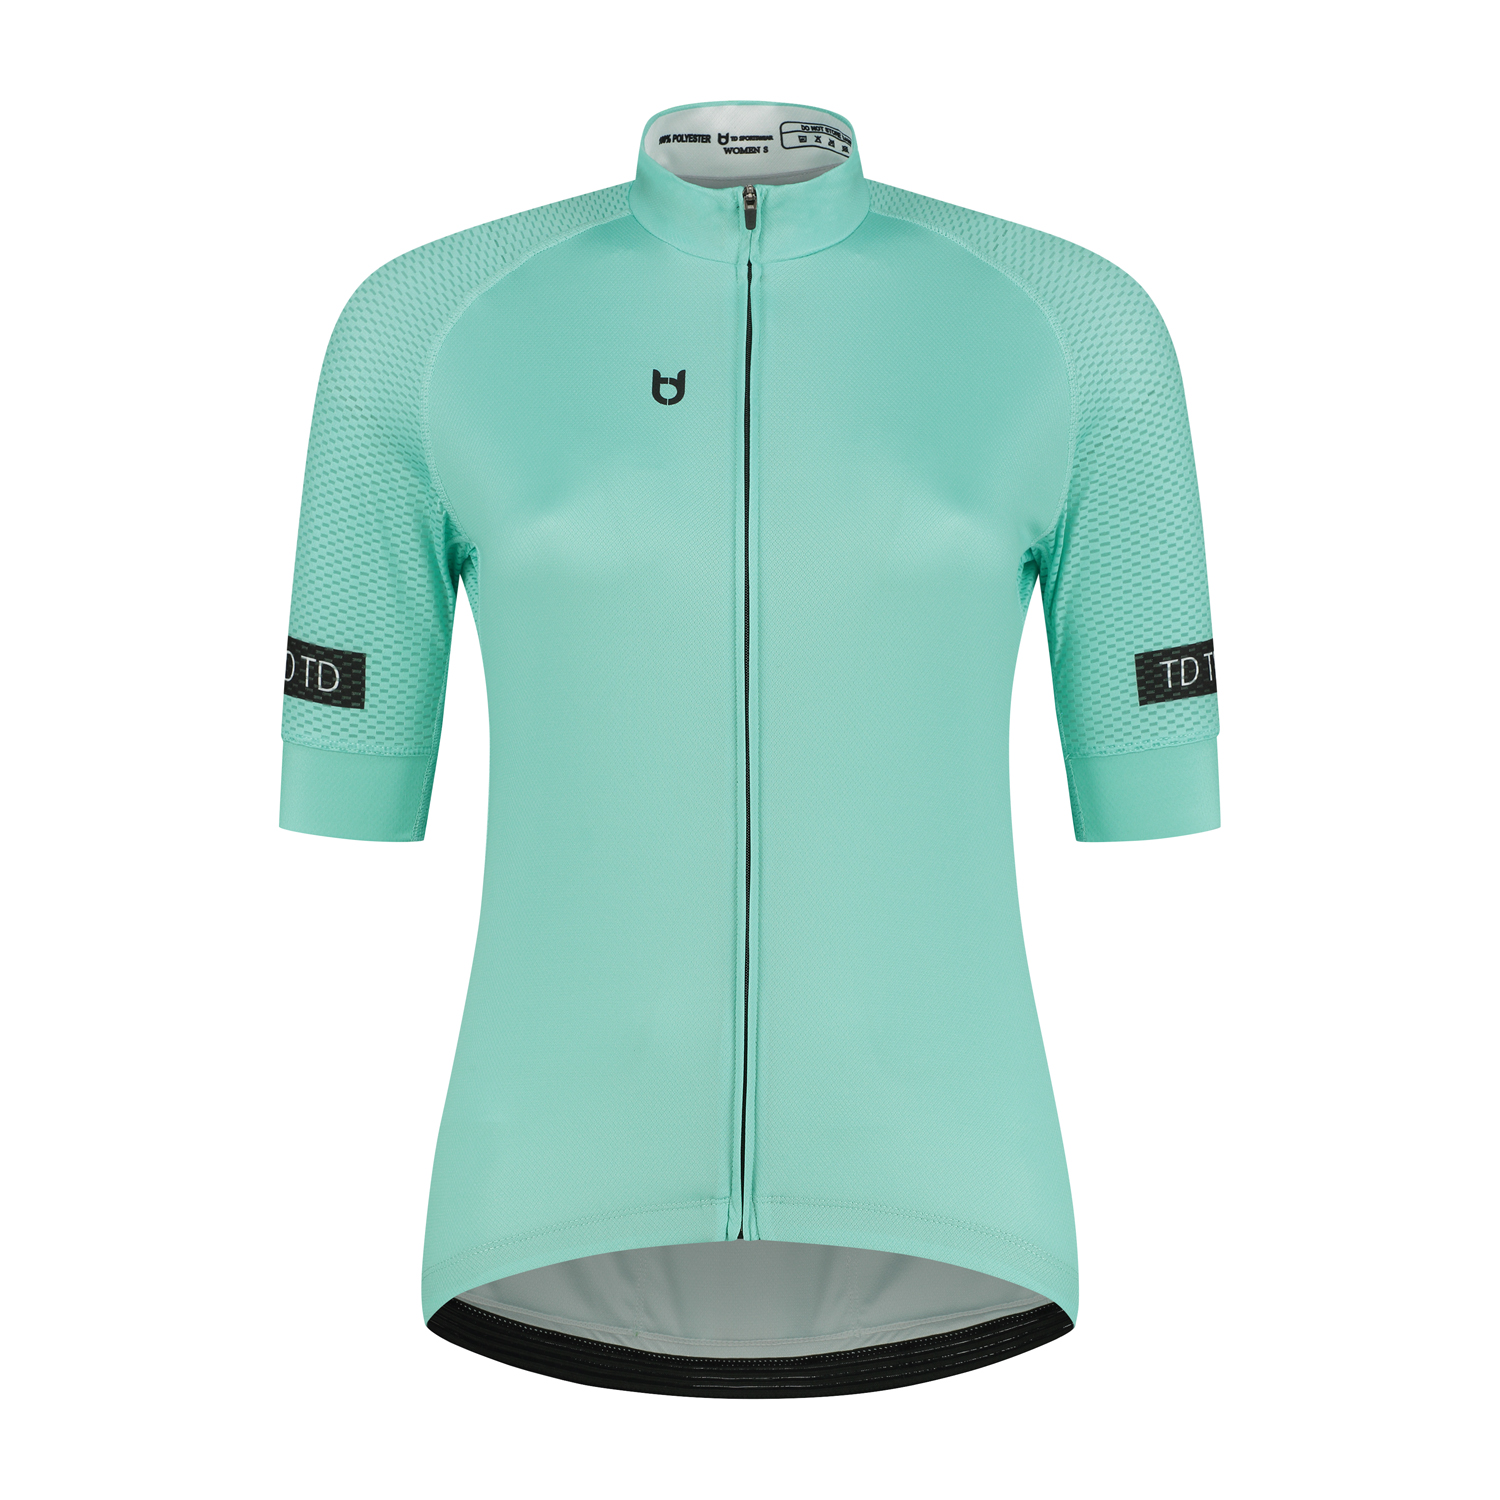 Front view women's cycling jersey short sleeve with celeste color from TD Sportswear